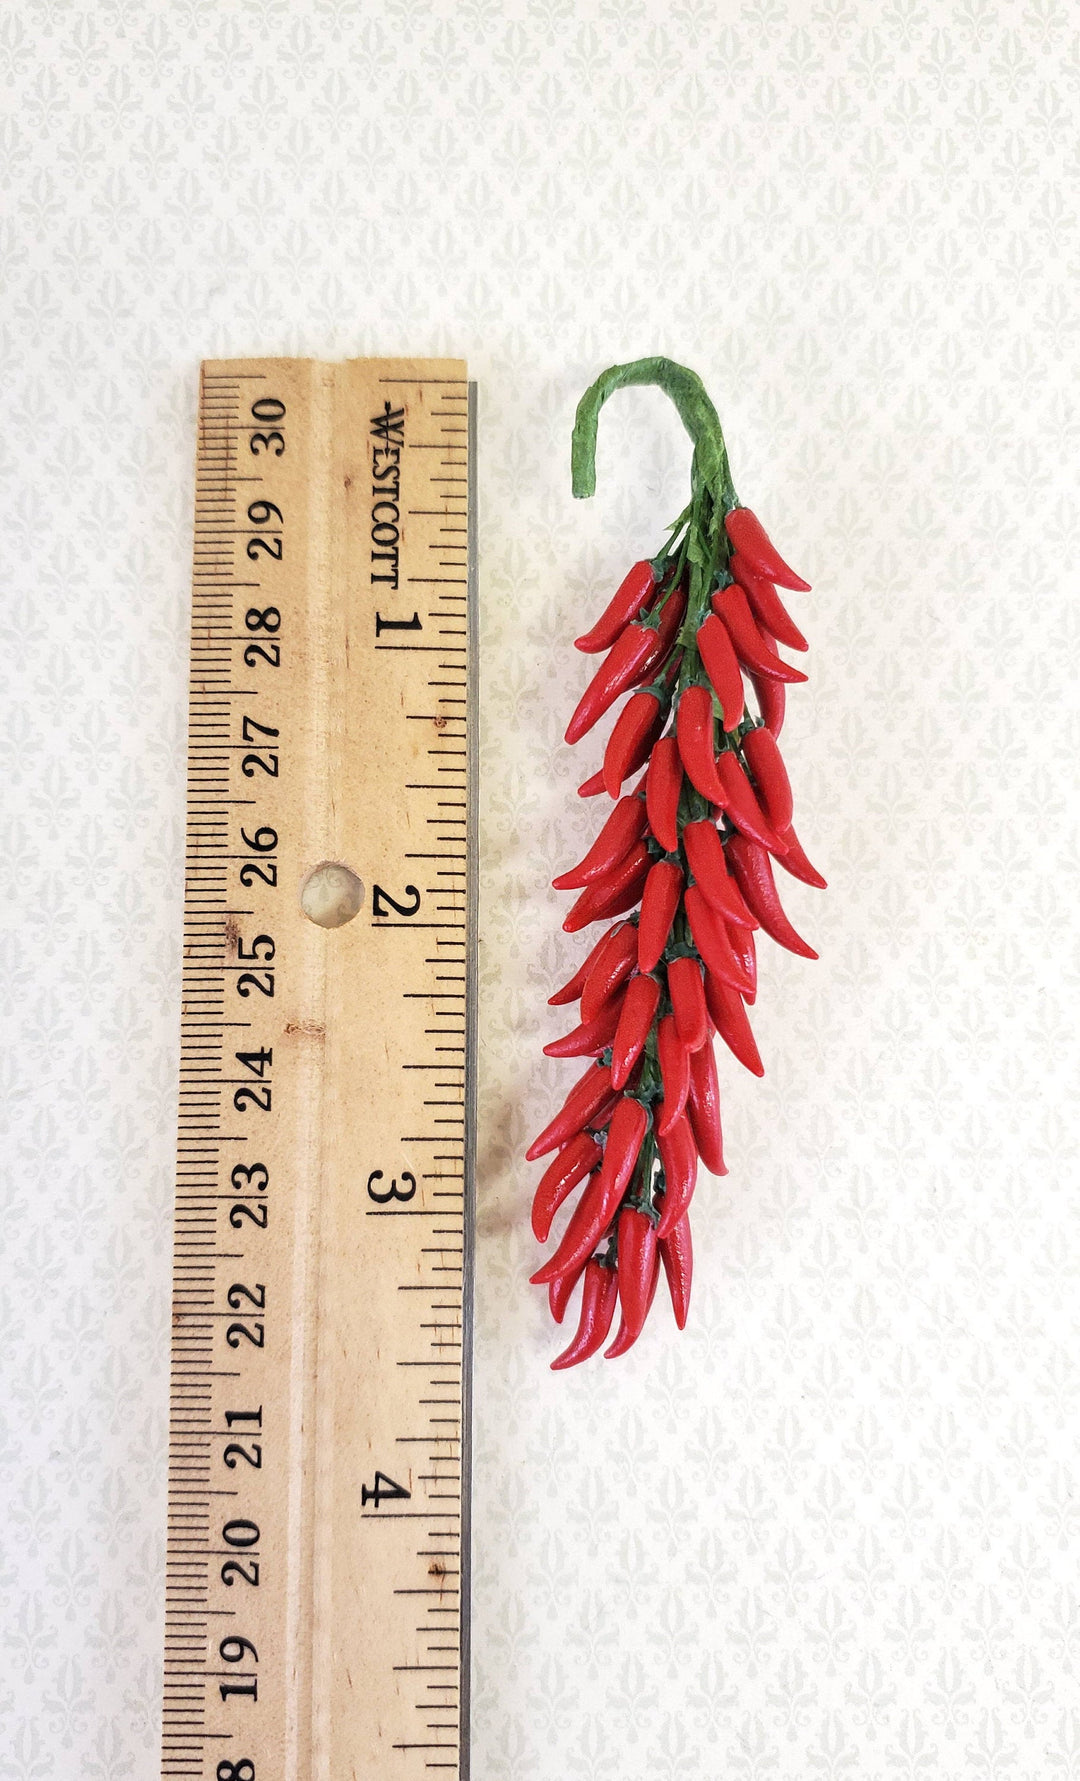 Dollhouse Red Chile Ristra 1:6 Scale Miniature 3.5" tall Decoration